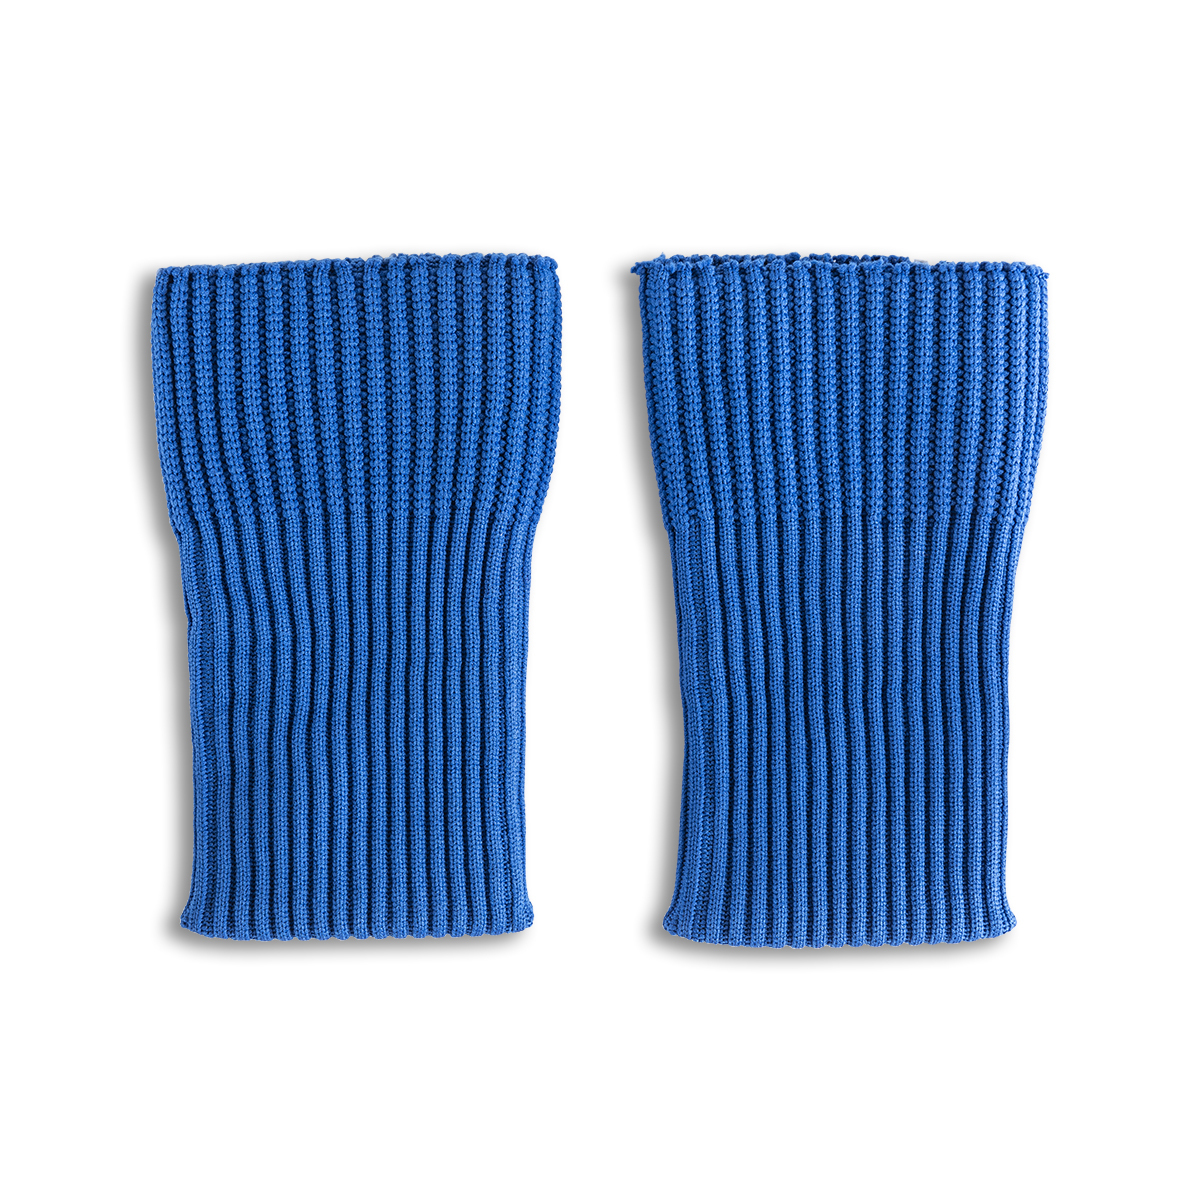 Heavy-Weight Knit Cuffs Replacement Pair/Pack